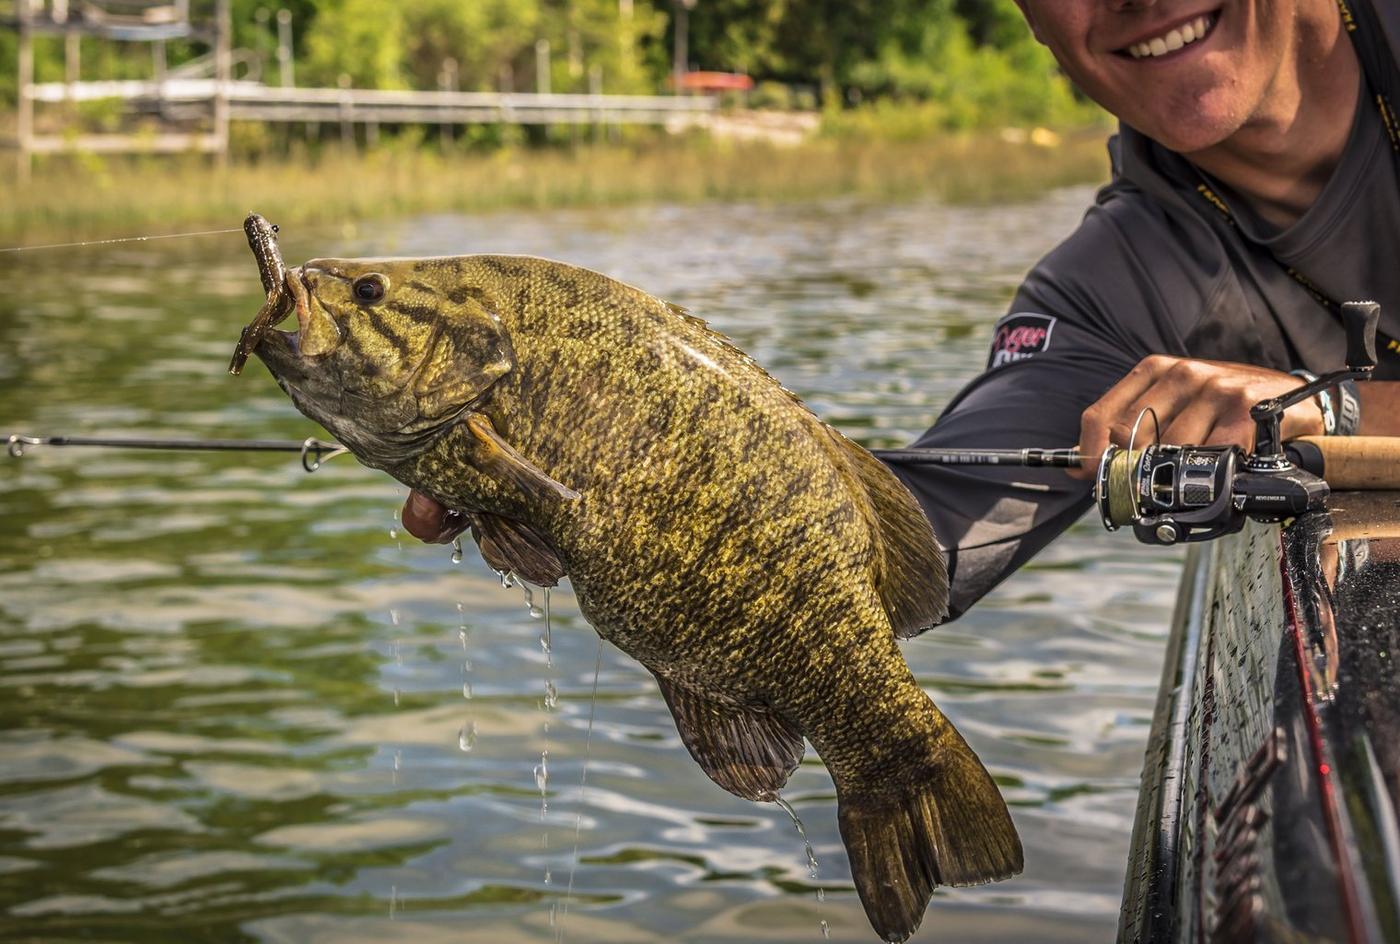 Angler holding smallmouth bass off side of boat